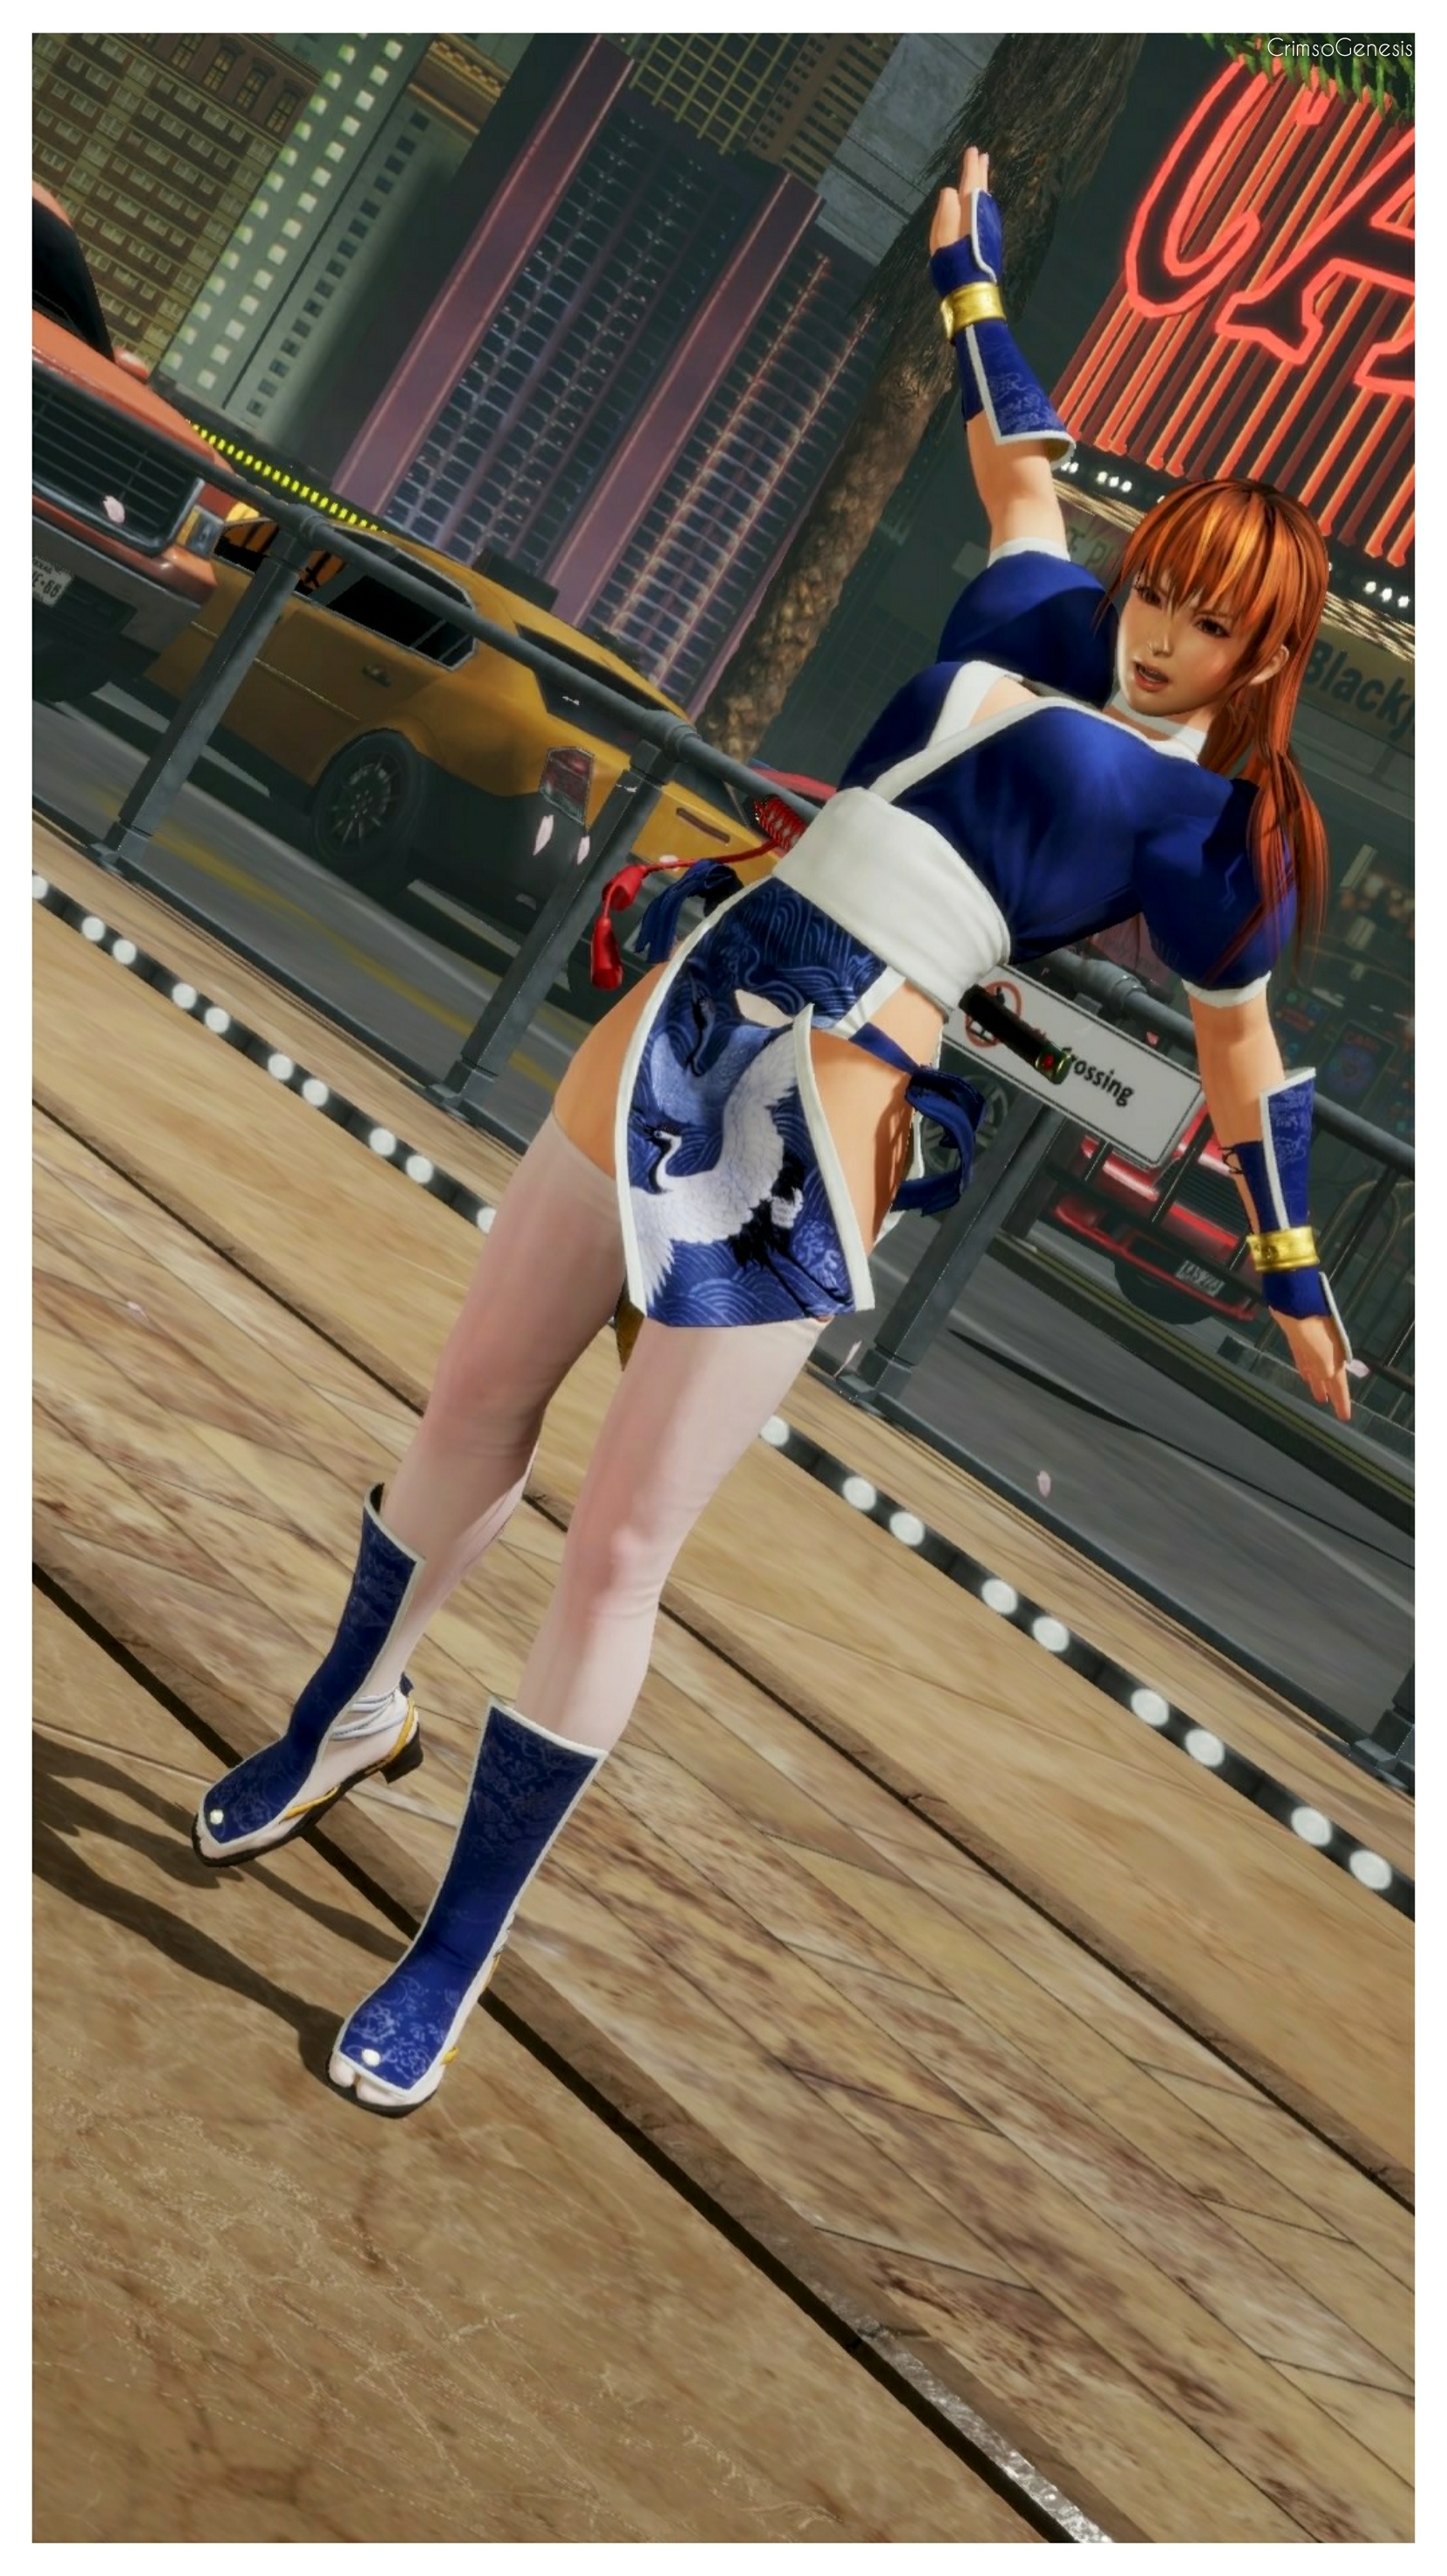 Kasumi from Dead or Alive in Anime Style by KyleKatarn1980 on DeviantArt